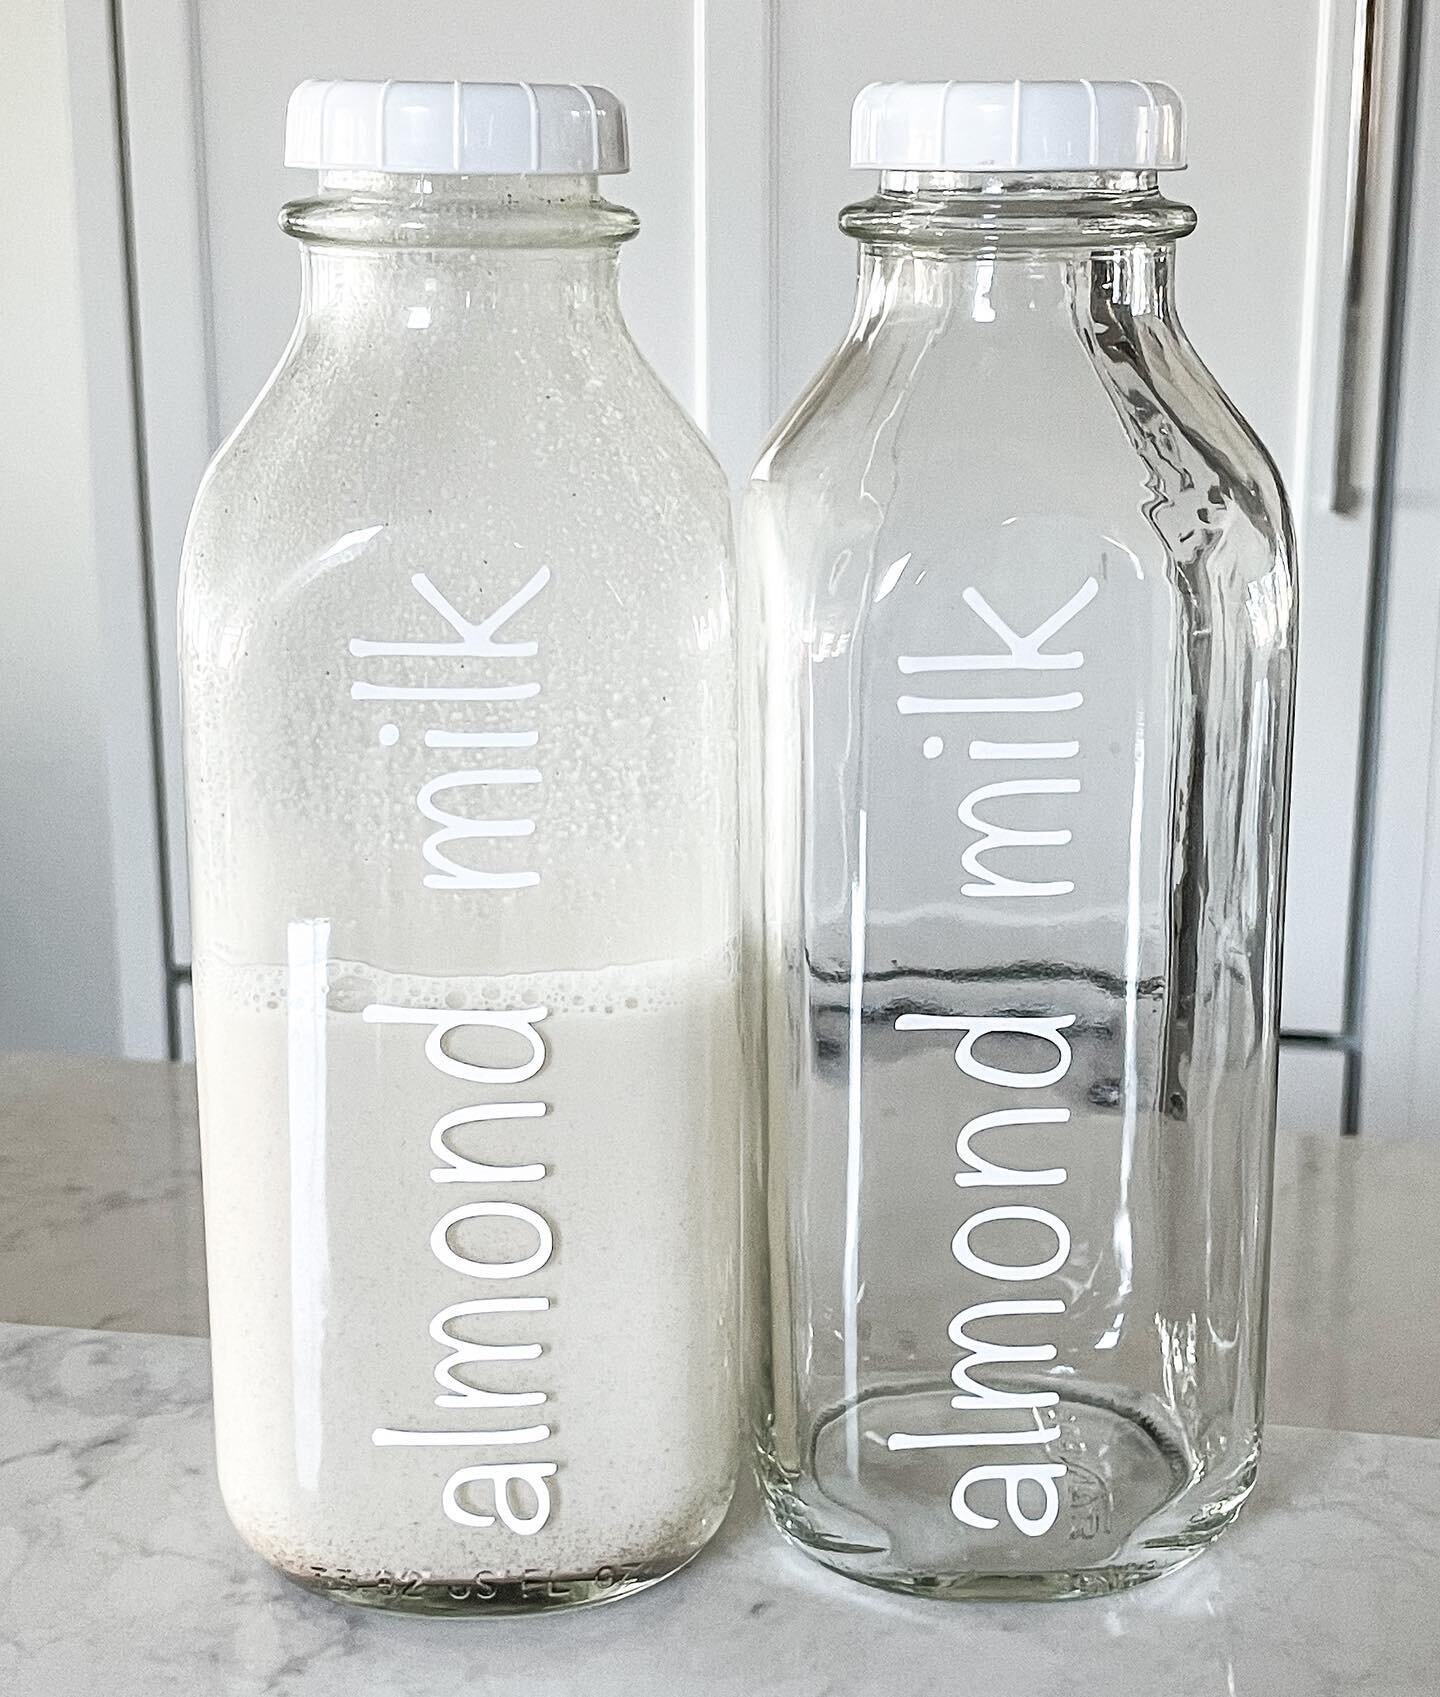 These labels give me all the feels🤍

I&rsquo;ve reached the point in COVID life where I am making my own almond milk which honestly is so delicious and froths so well

What&rsquo;s one unexpected thing you&rsquo;ve started doing this year?